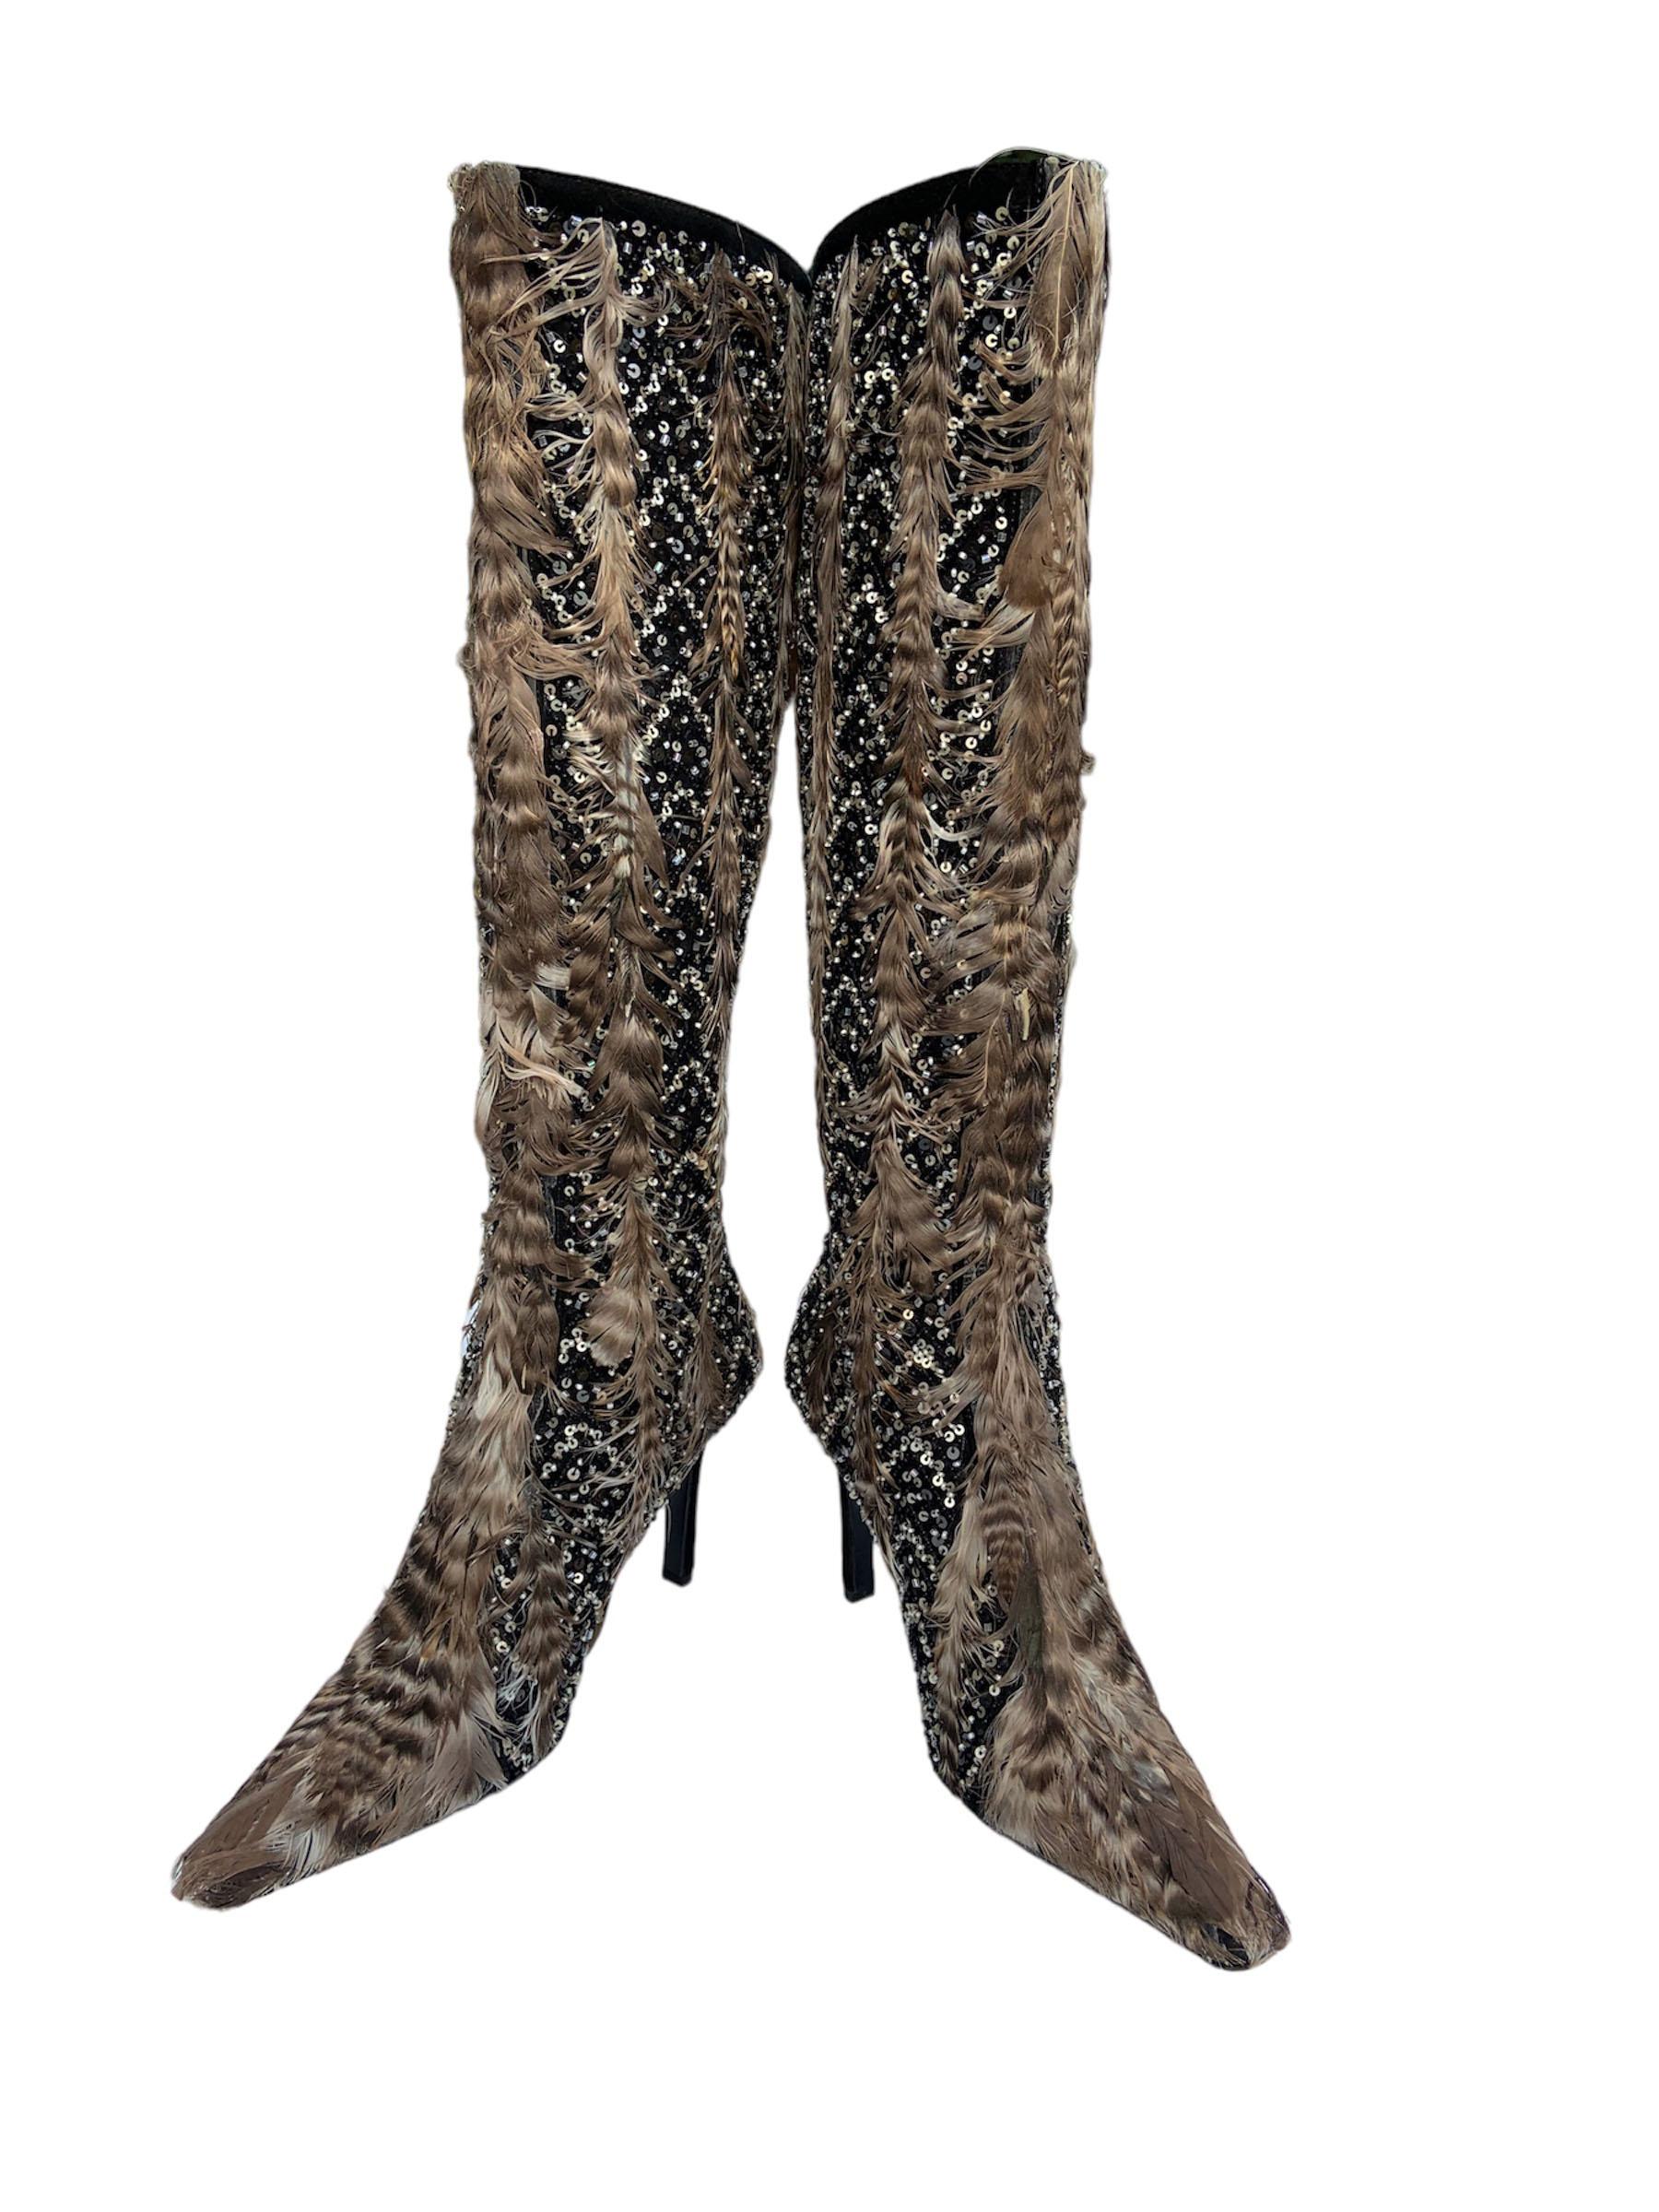 Vintage and Brand New ! 
For Memories about Unforgettable Oscar de la Renta ! 
Oscar de la Renta Black Suede Knee Boots
Italian size 36.5 - US 6.5
Fully Embellished with Black and Clear Beads, Black and Silver Tone Sequins, Real Feathers.
Black